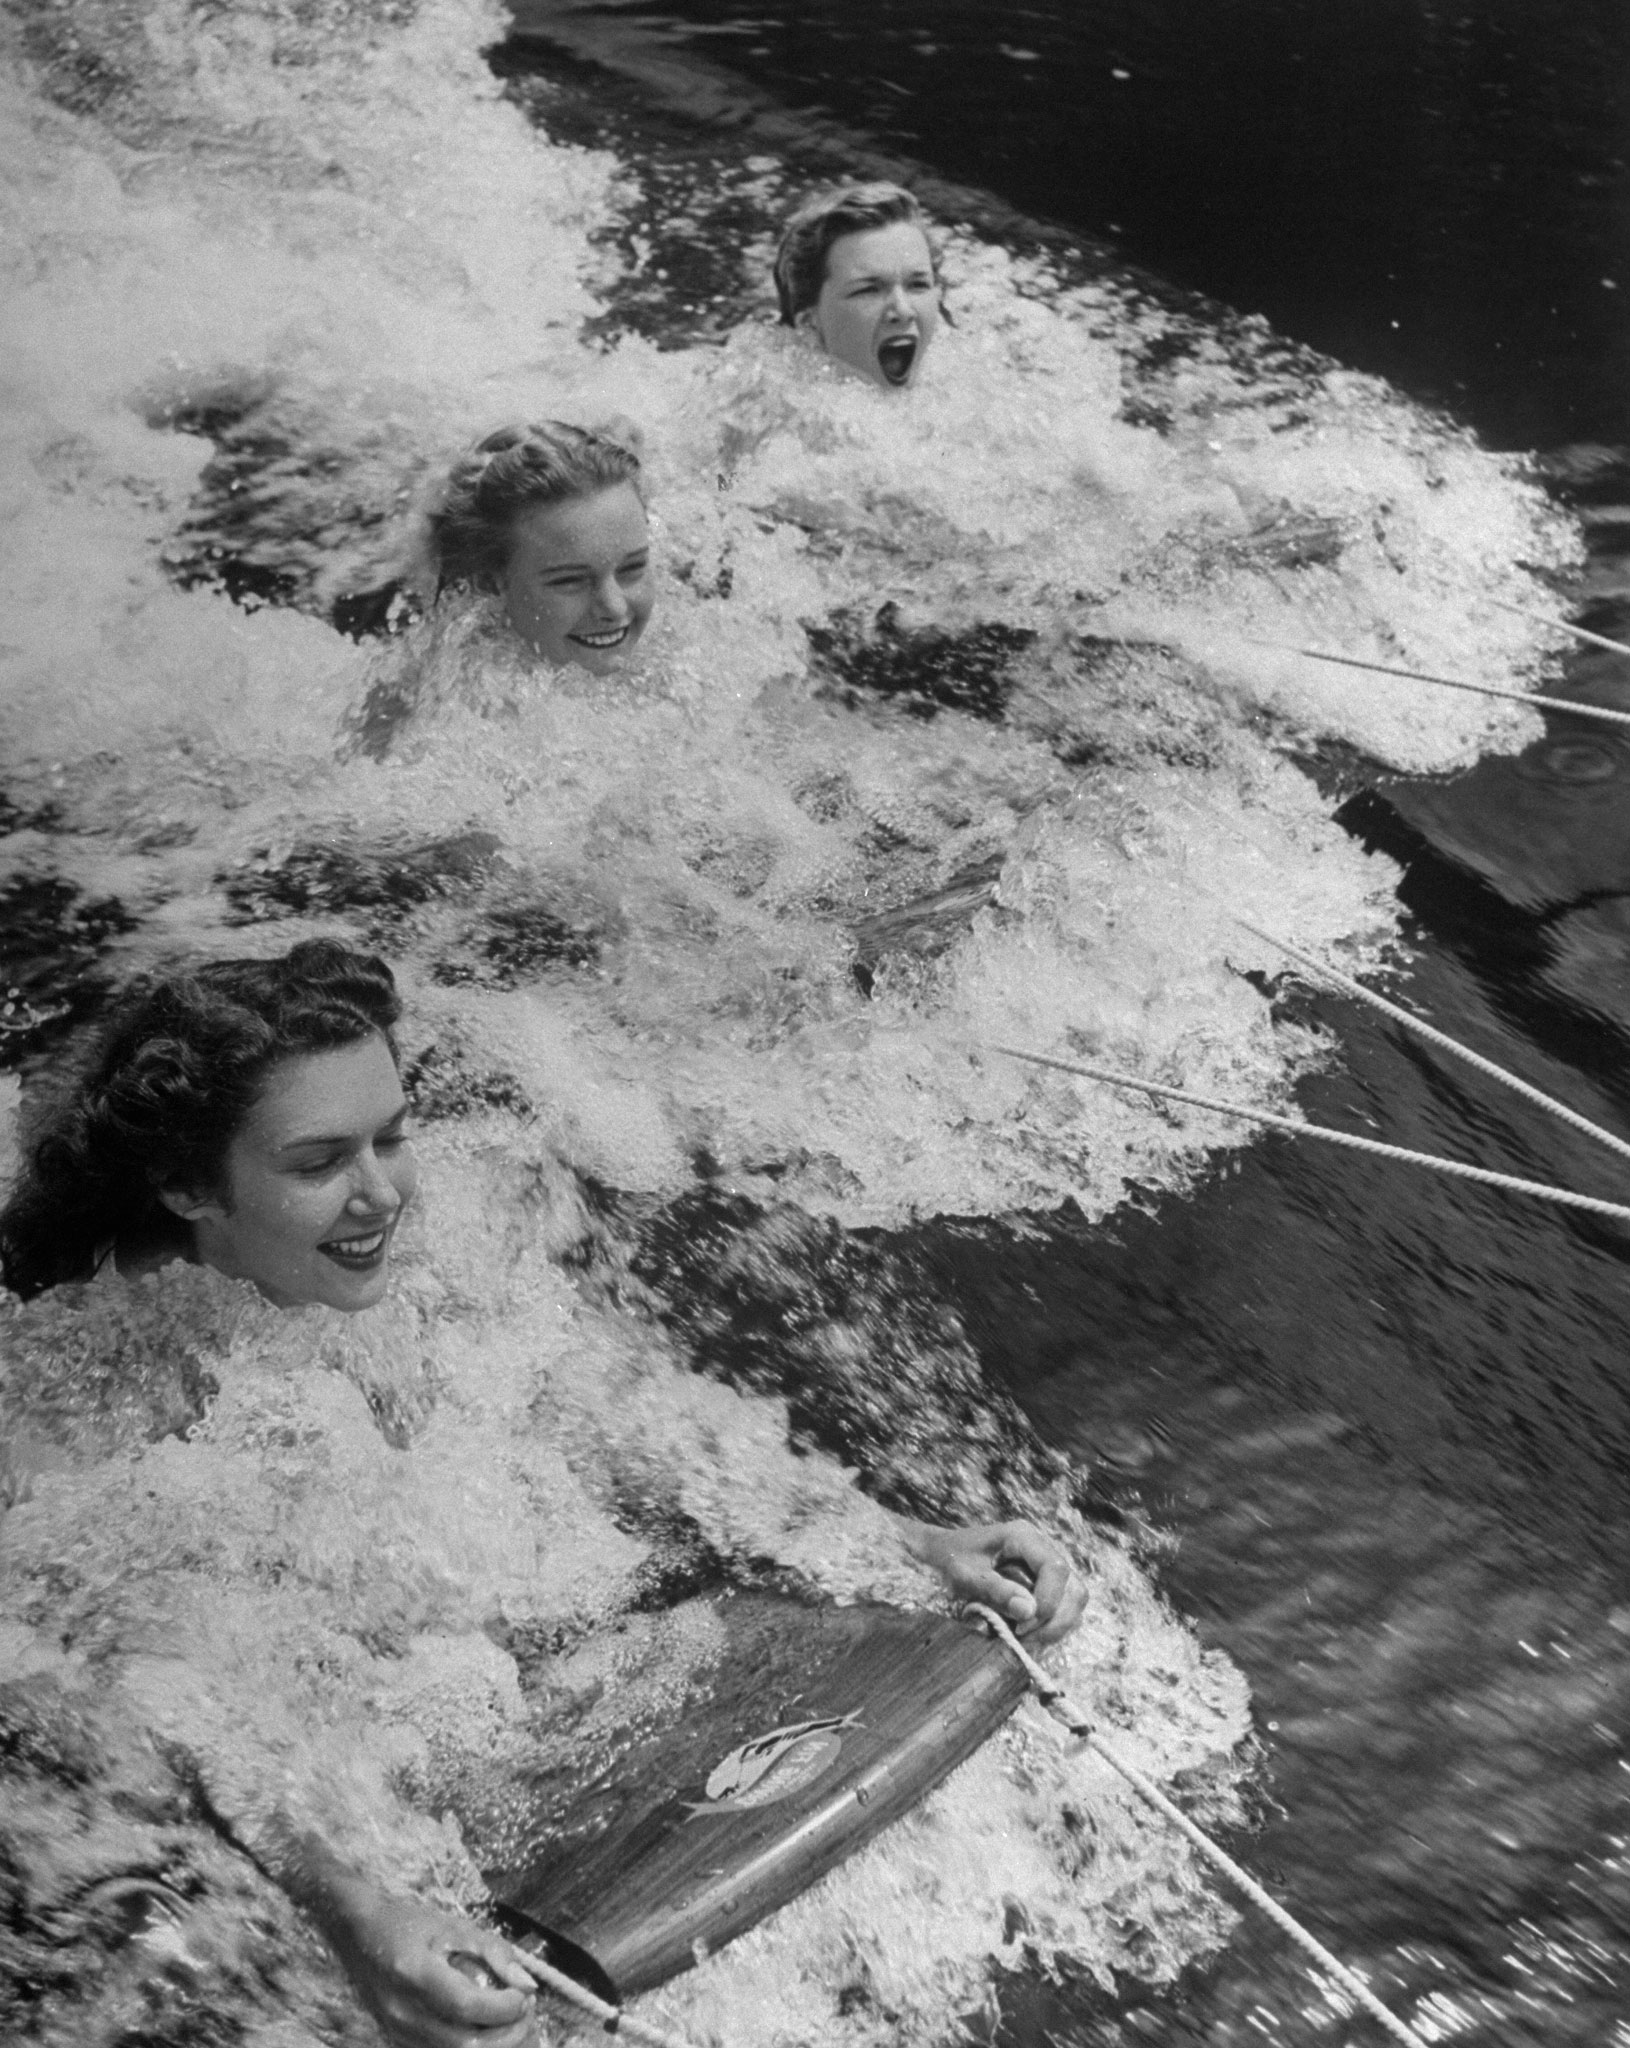 Women demonstrate the Porpoise Diving Fin, a streamlined 2-inch thick mahogany plank at the end of a tow rope, 1948.